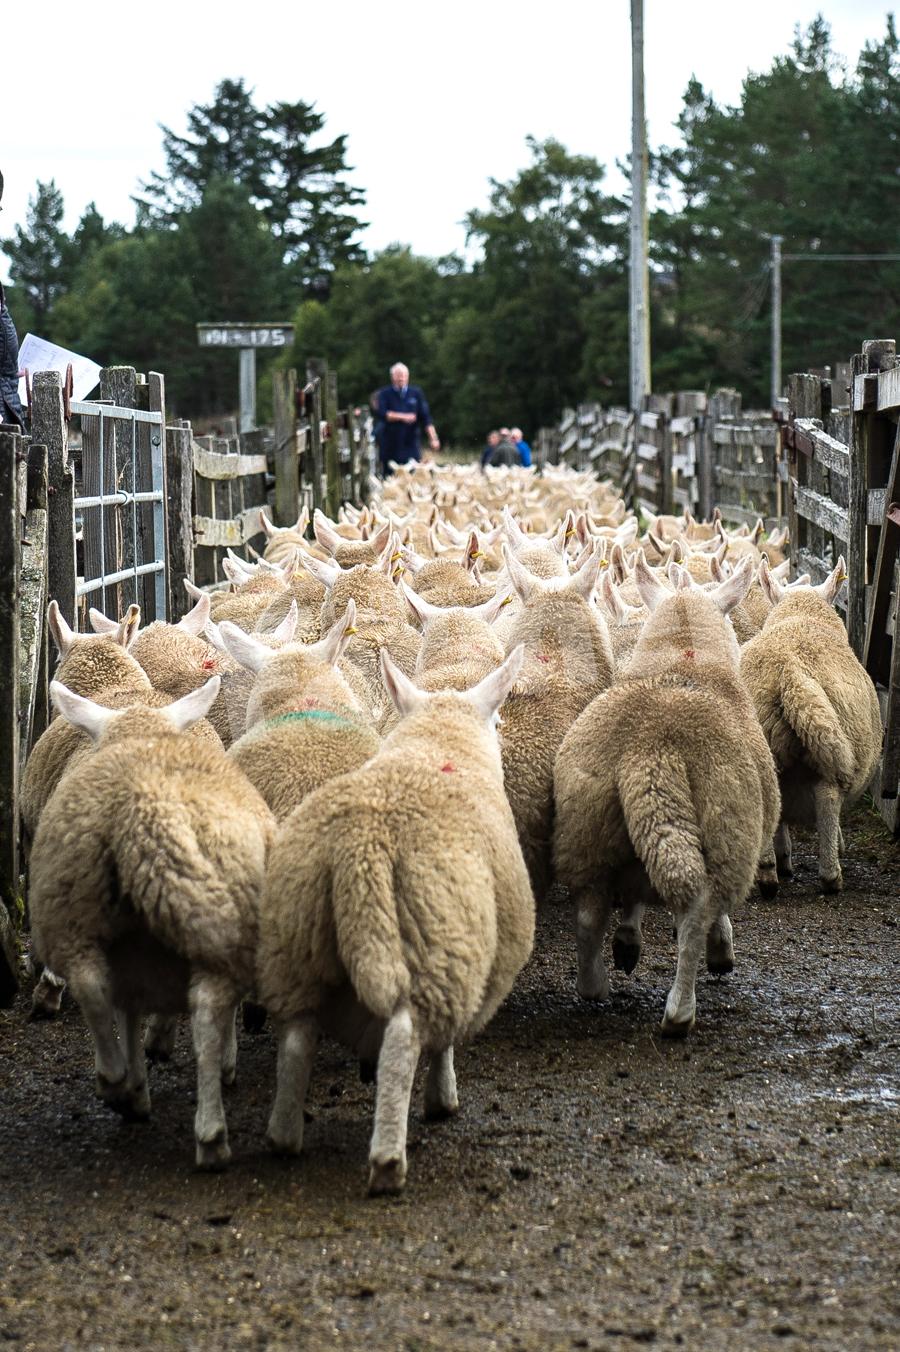 Some of the Badanloch consignment of lambs heading to their pens. Ref: RH15817503.